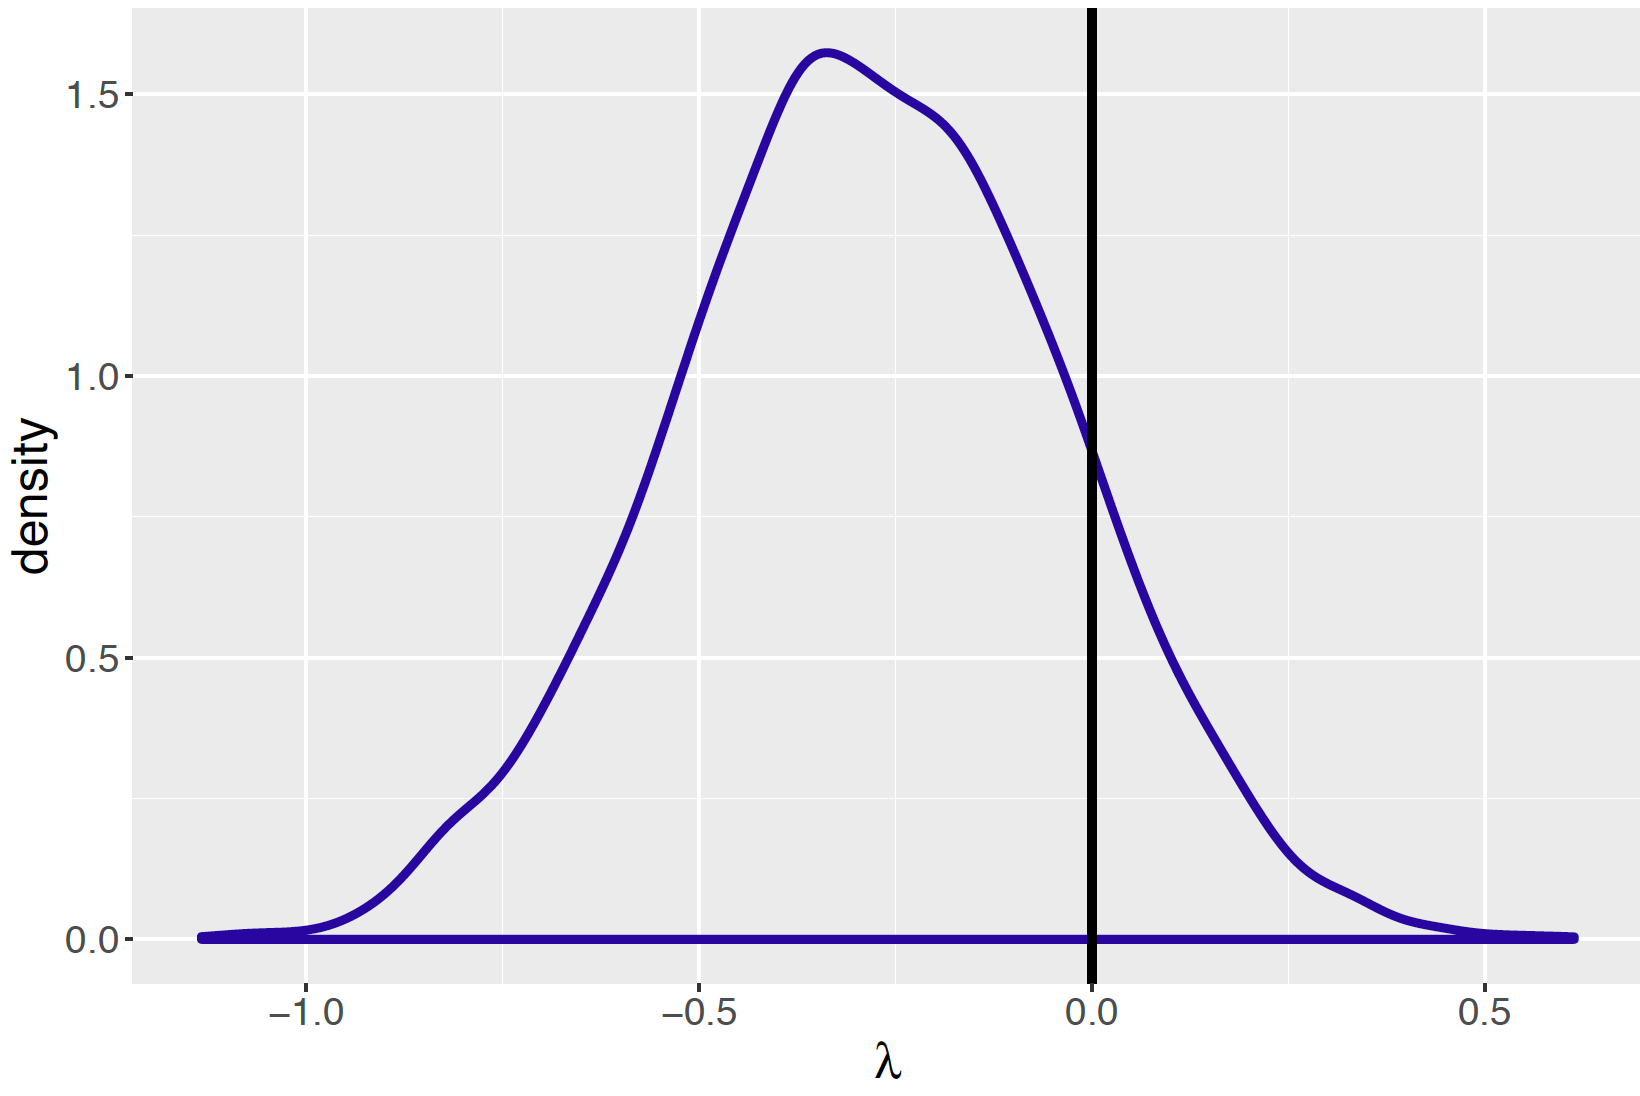 Posterior density estimate of simulated draws of log odds ratio  for visits to Facebook example.  A vertical line is drawn at the value 0 corresponding to no association between gender and visits to Facebook.